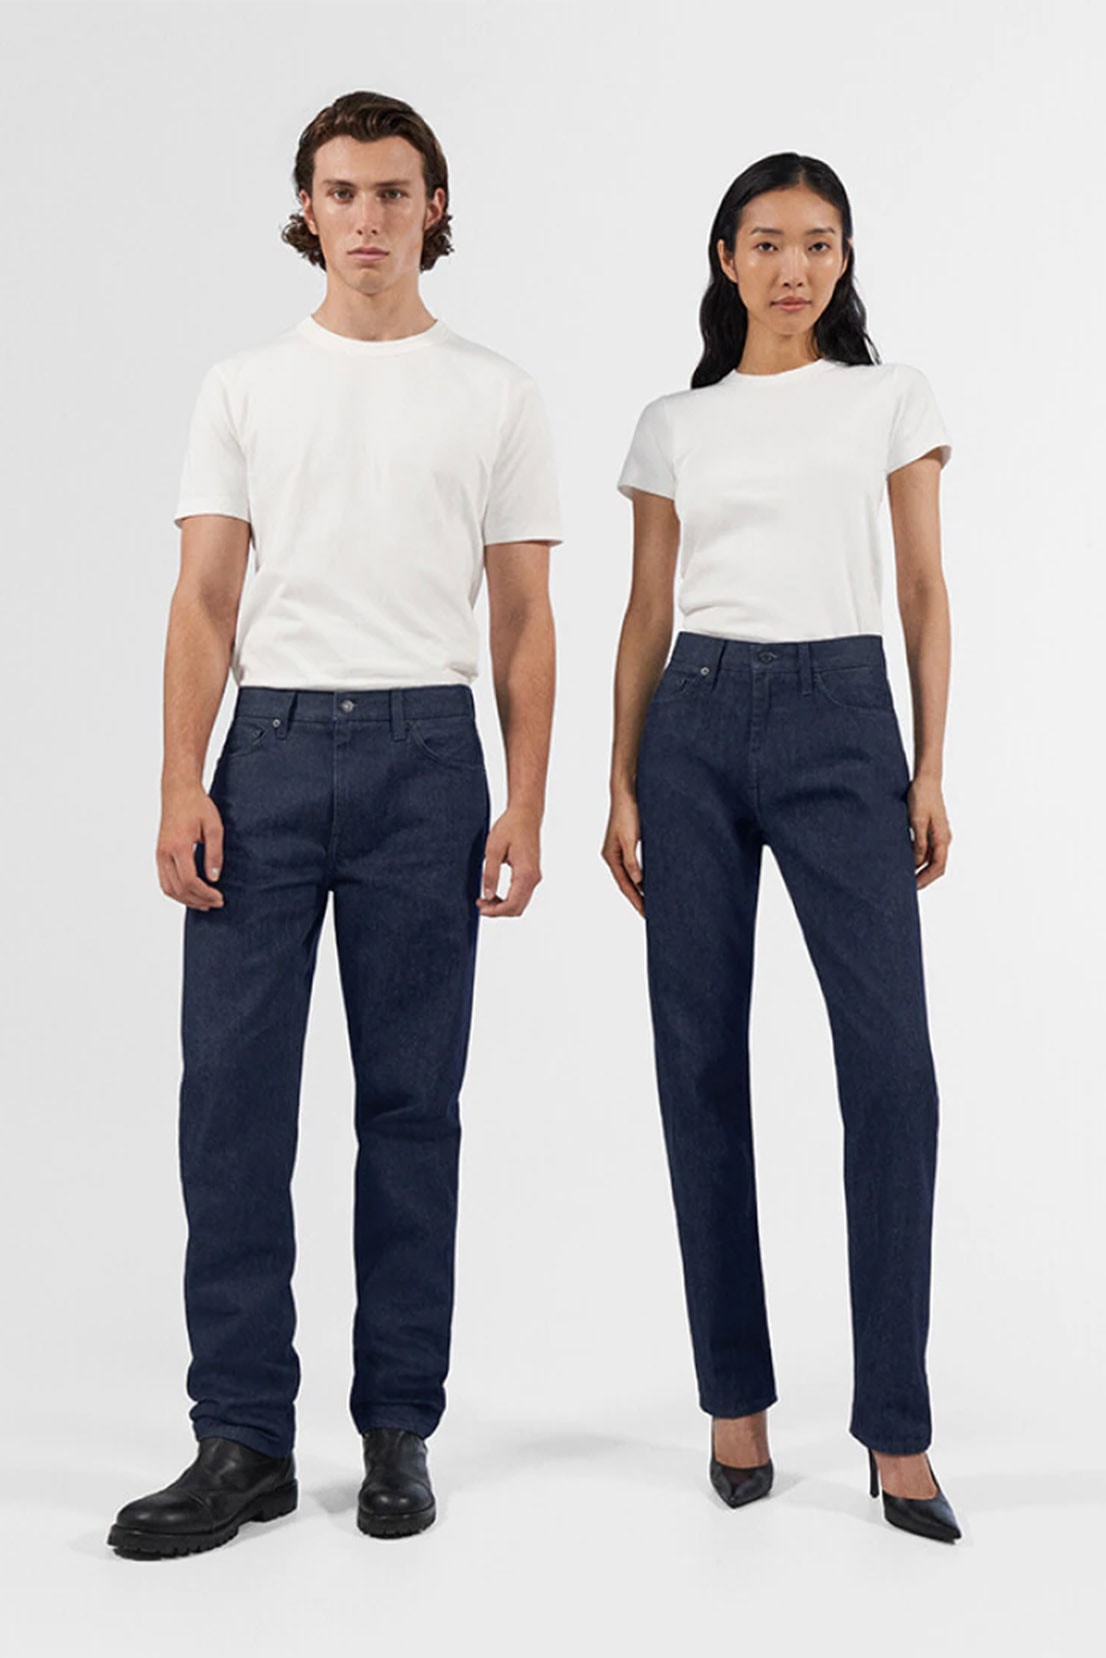 Helmut Lang and UNIQLO Reconnect for Classic Cut Jeans